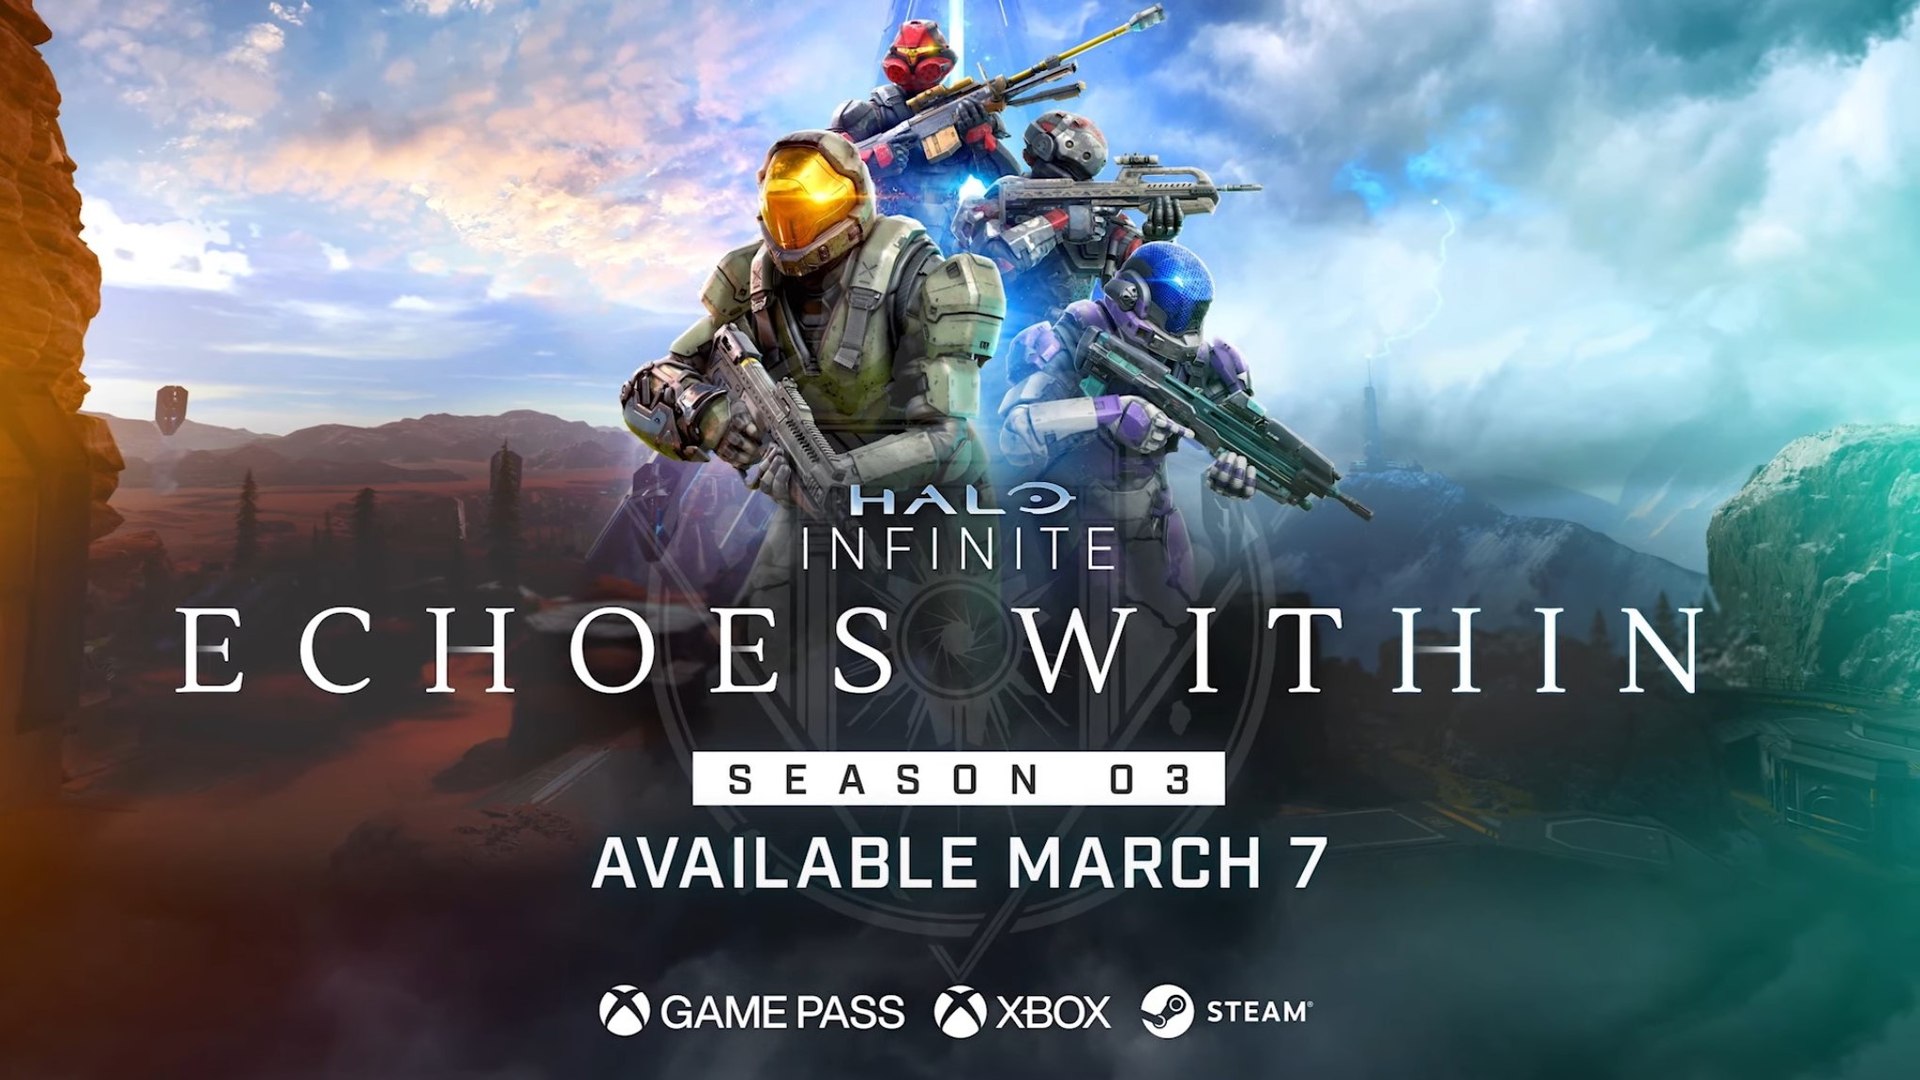 Halo Infinite Season 2 starts on 3rd May – here's a teaser trailer